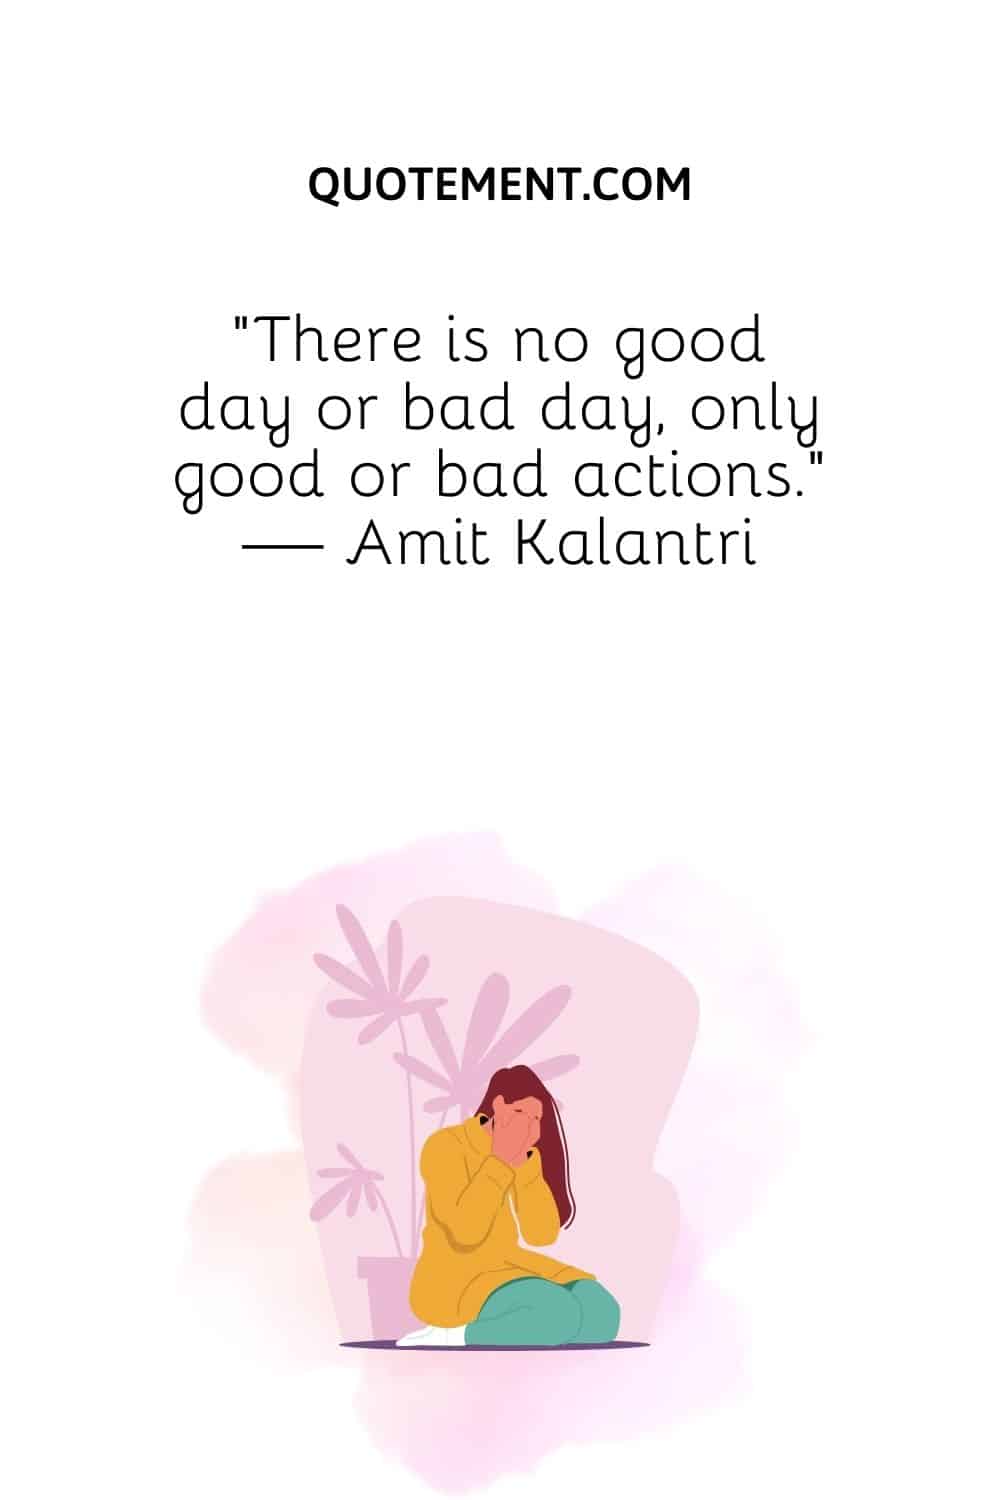 There is no good day or bad day, only good or bad actions